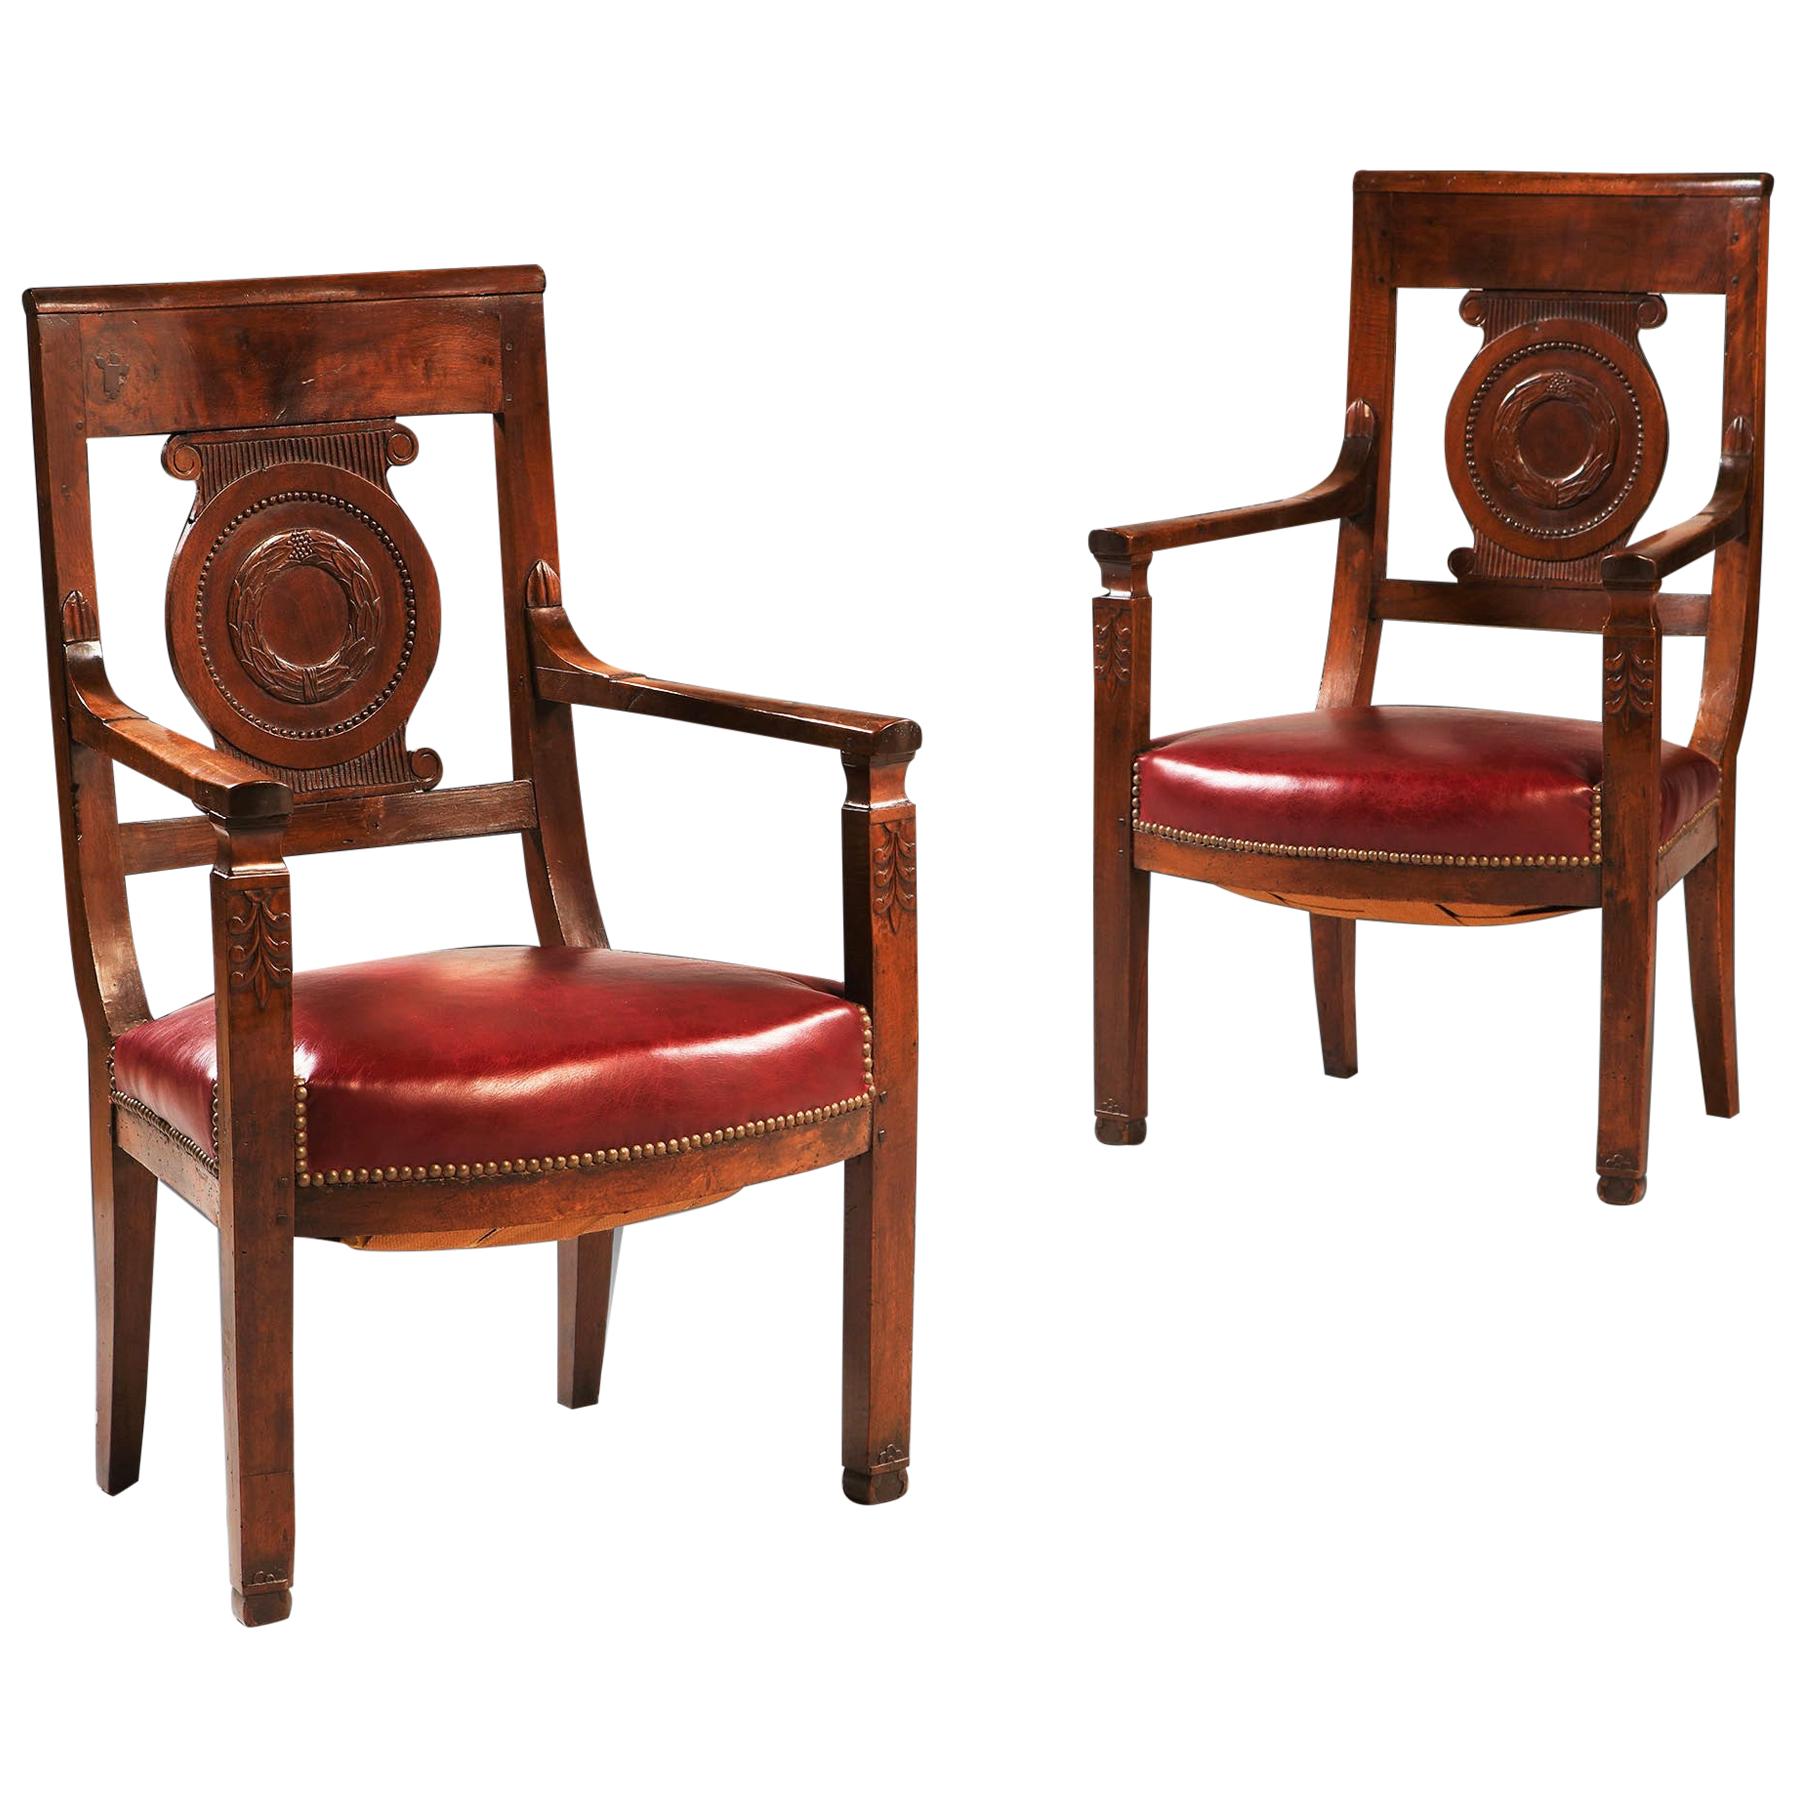 19th Century French Empire Mahogany Brown Wood Fauteuils or Armchairs Red, Pair